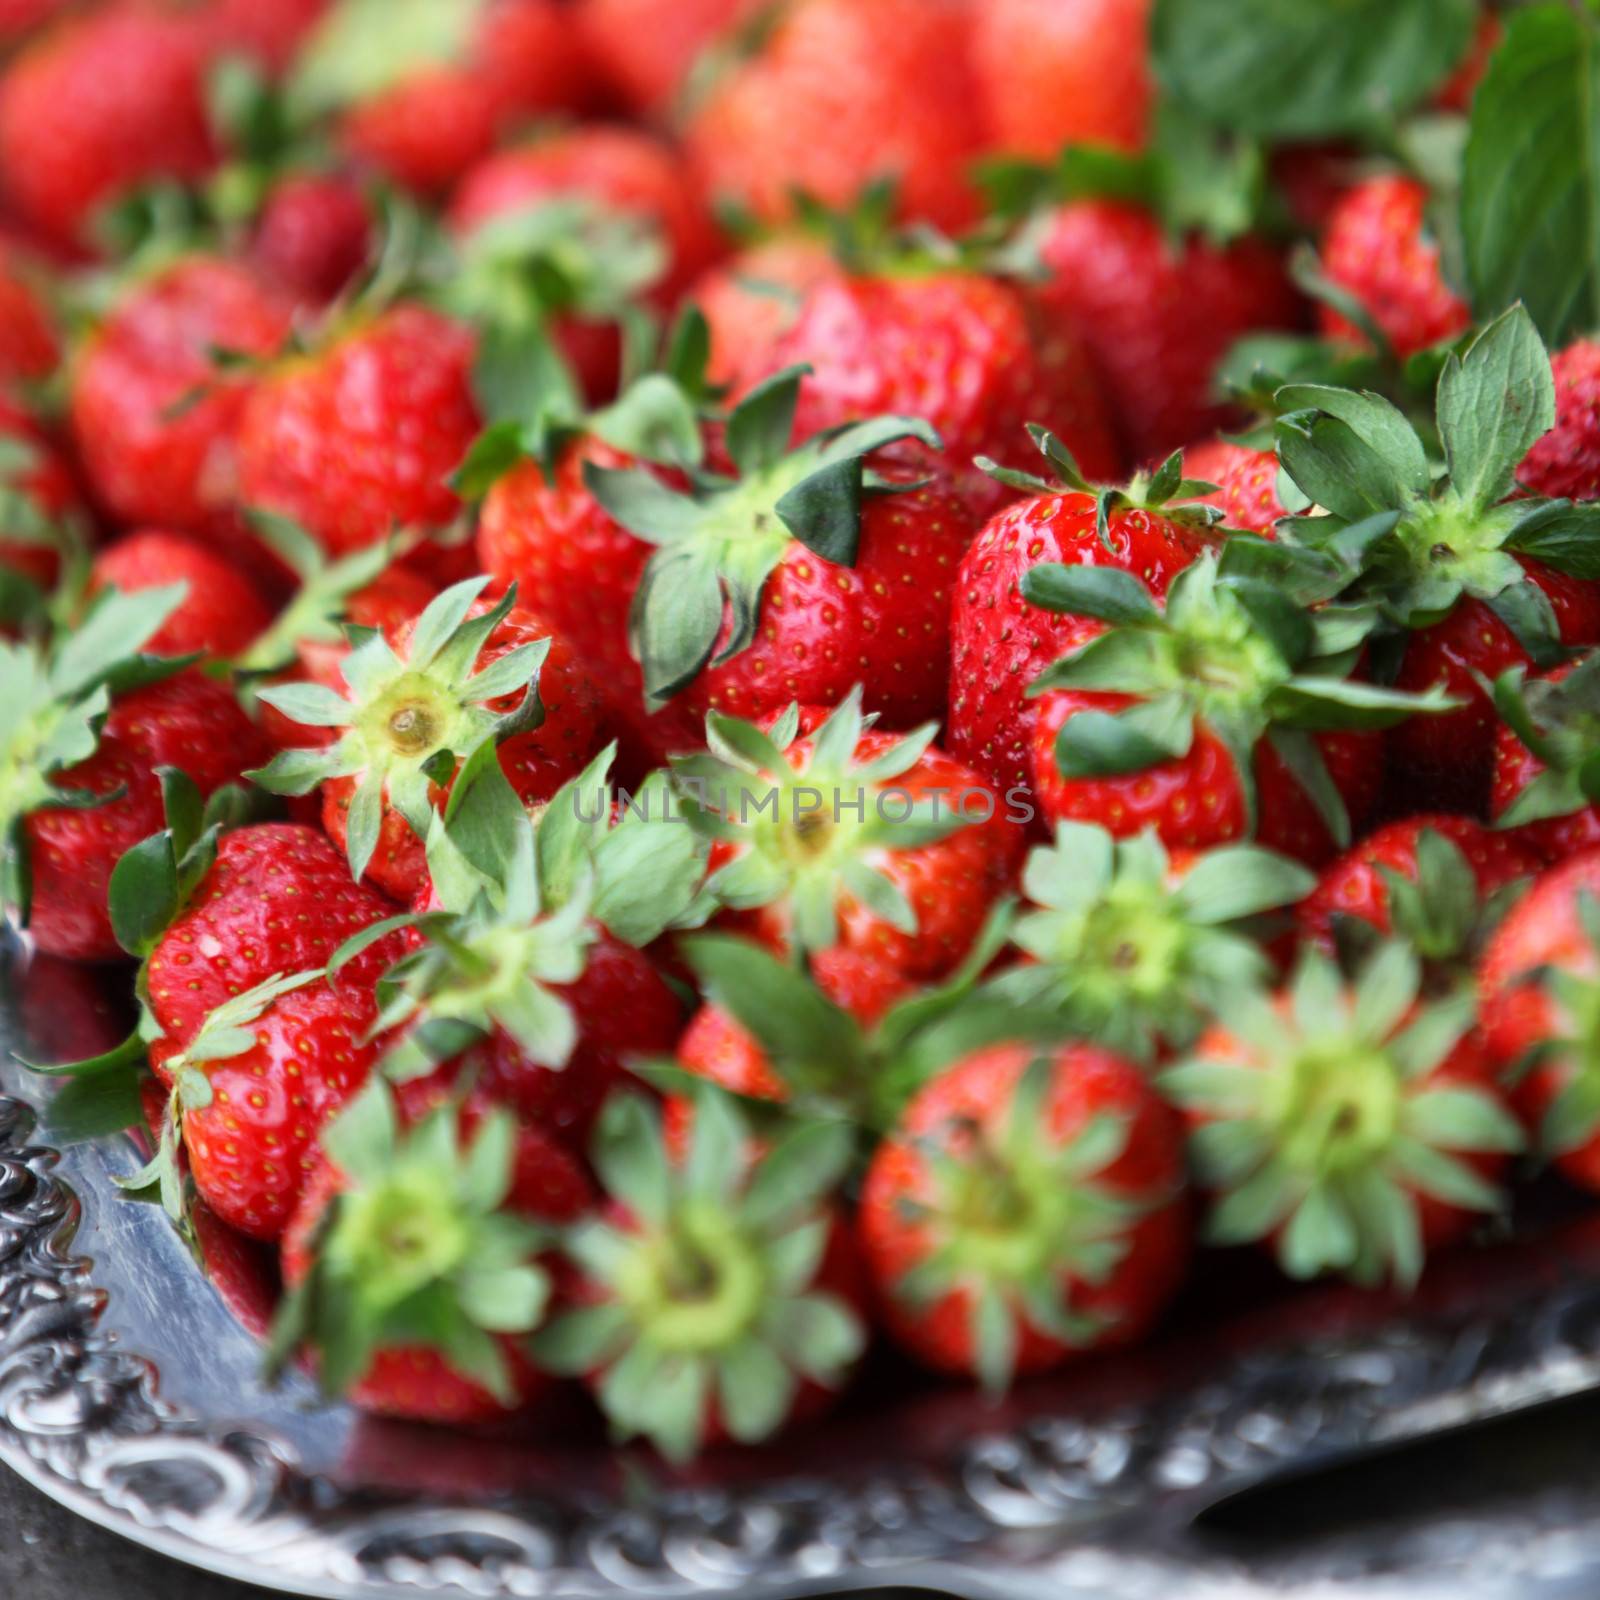 Silver tray and fresh strawberries by Farina6000